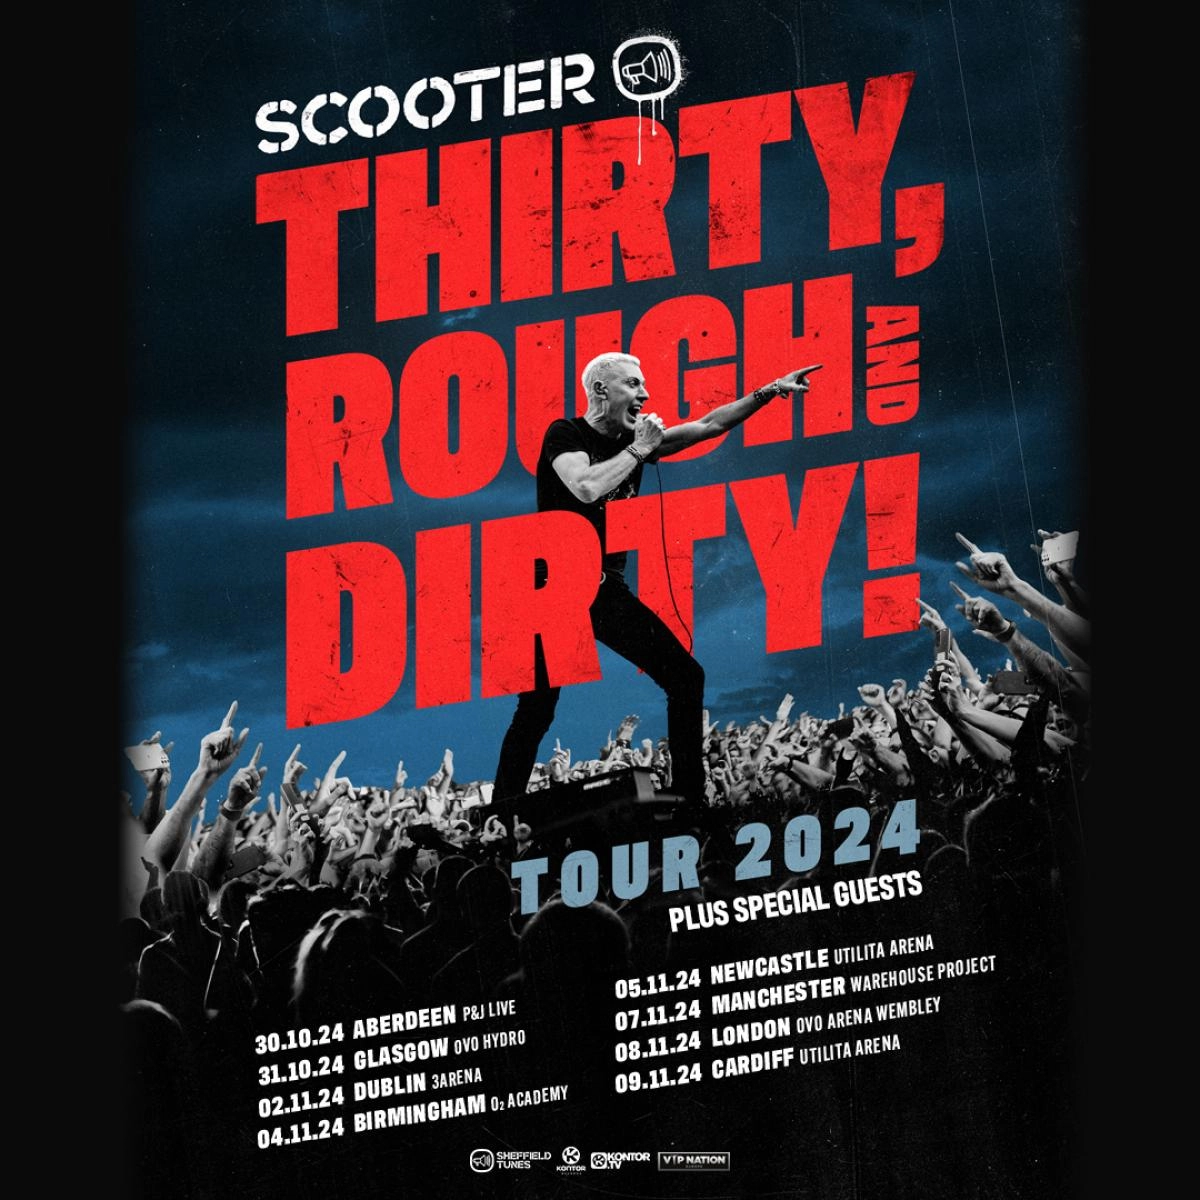 Scooter at OVO Arena Wembley Tickets